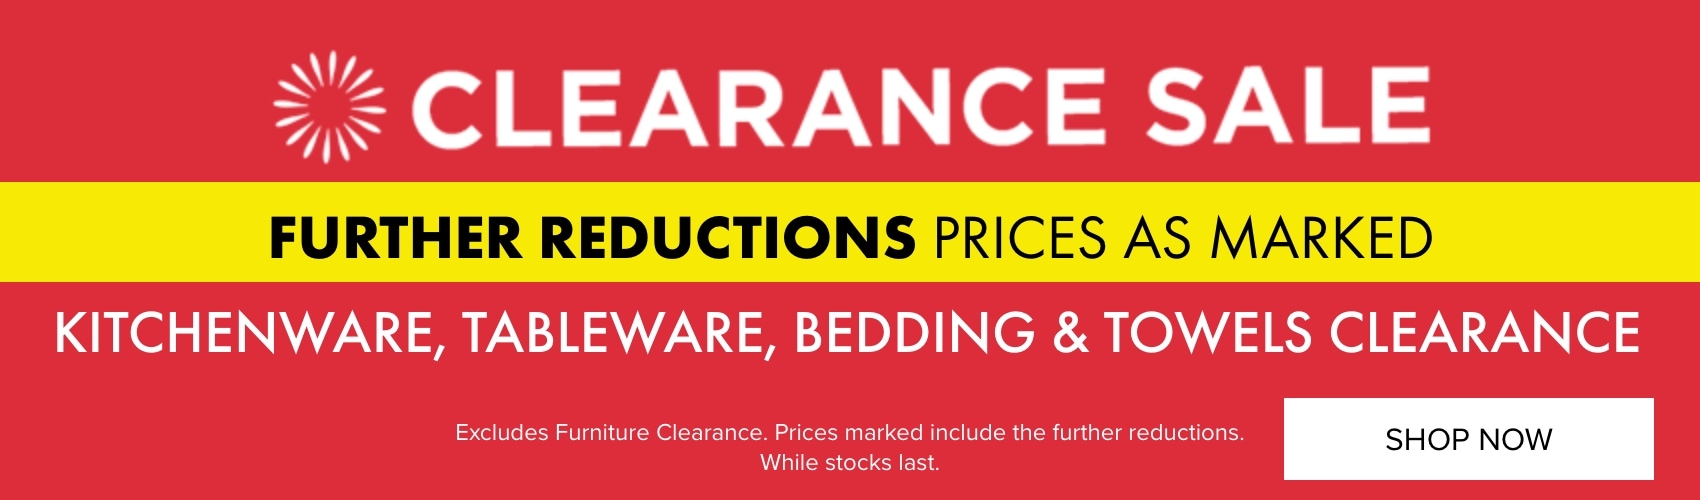 CLEARANCE SALE: Further Reductions Prices as Marked - Kitchenware, Tableware, Bedding & Towels Clearance